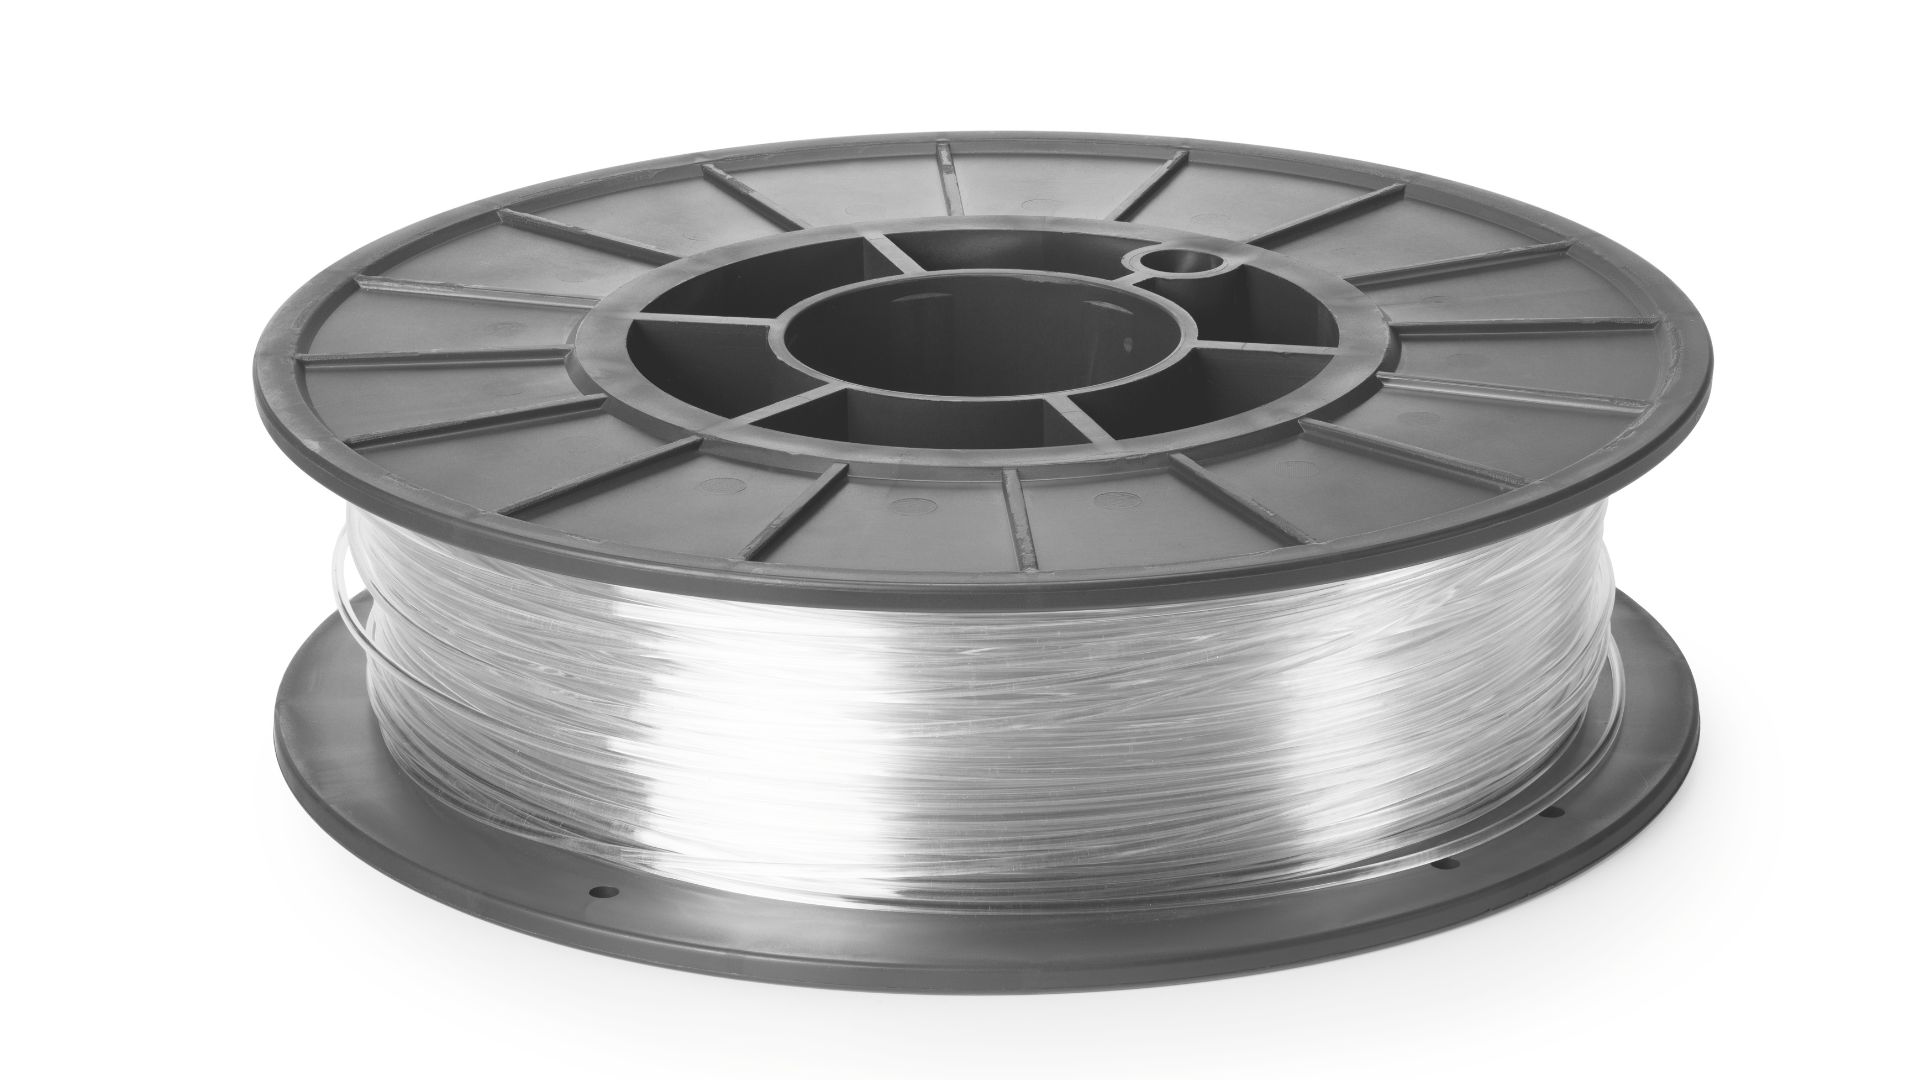 What Is PVA Filament? What Is It Used For?